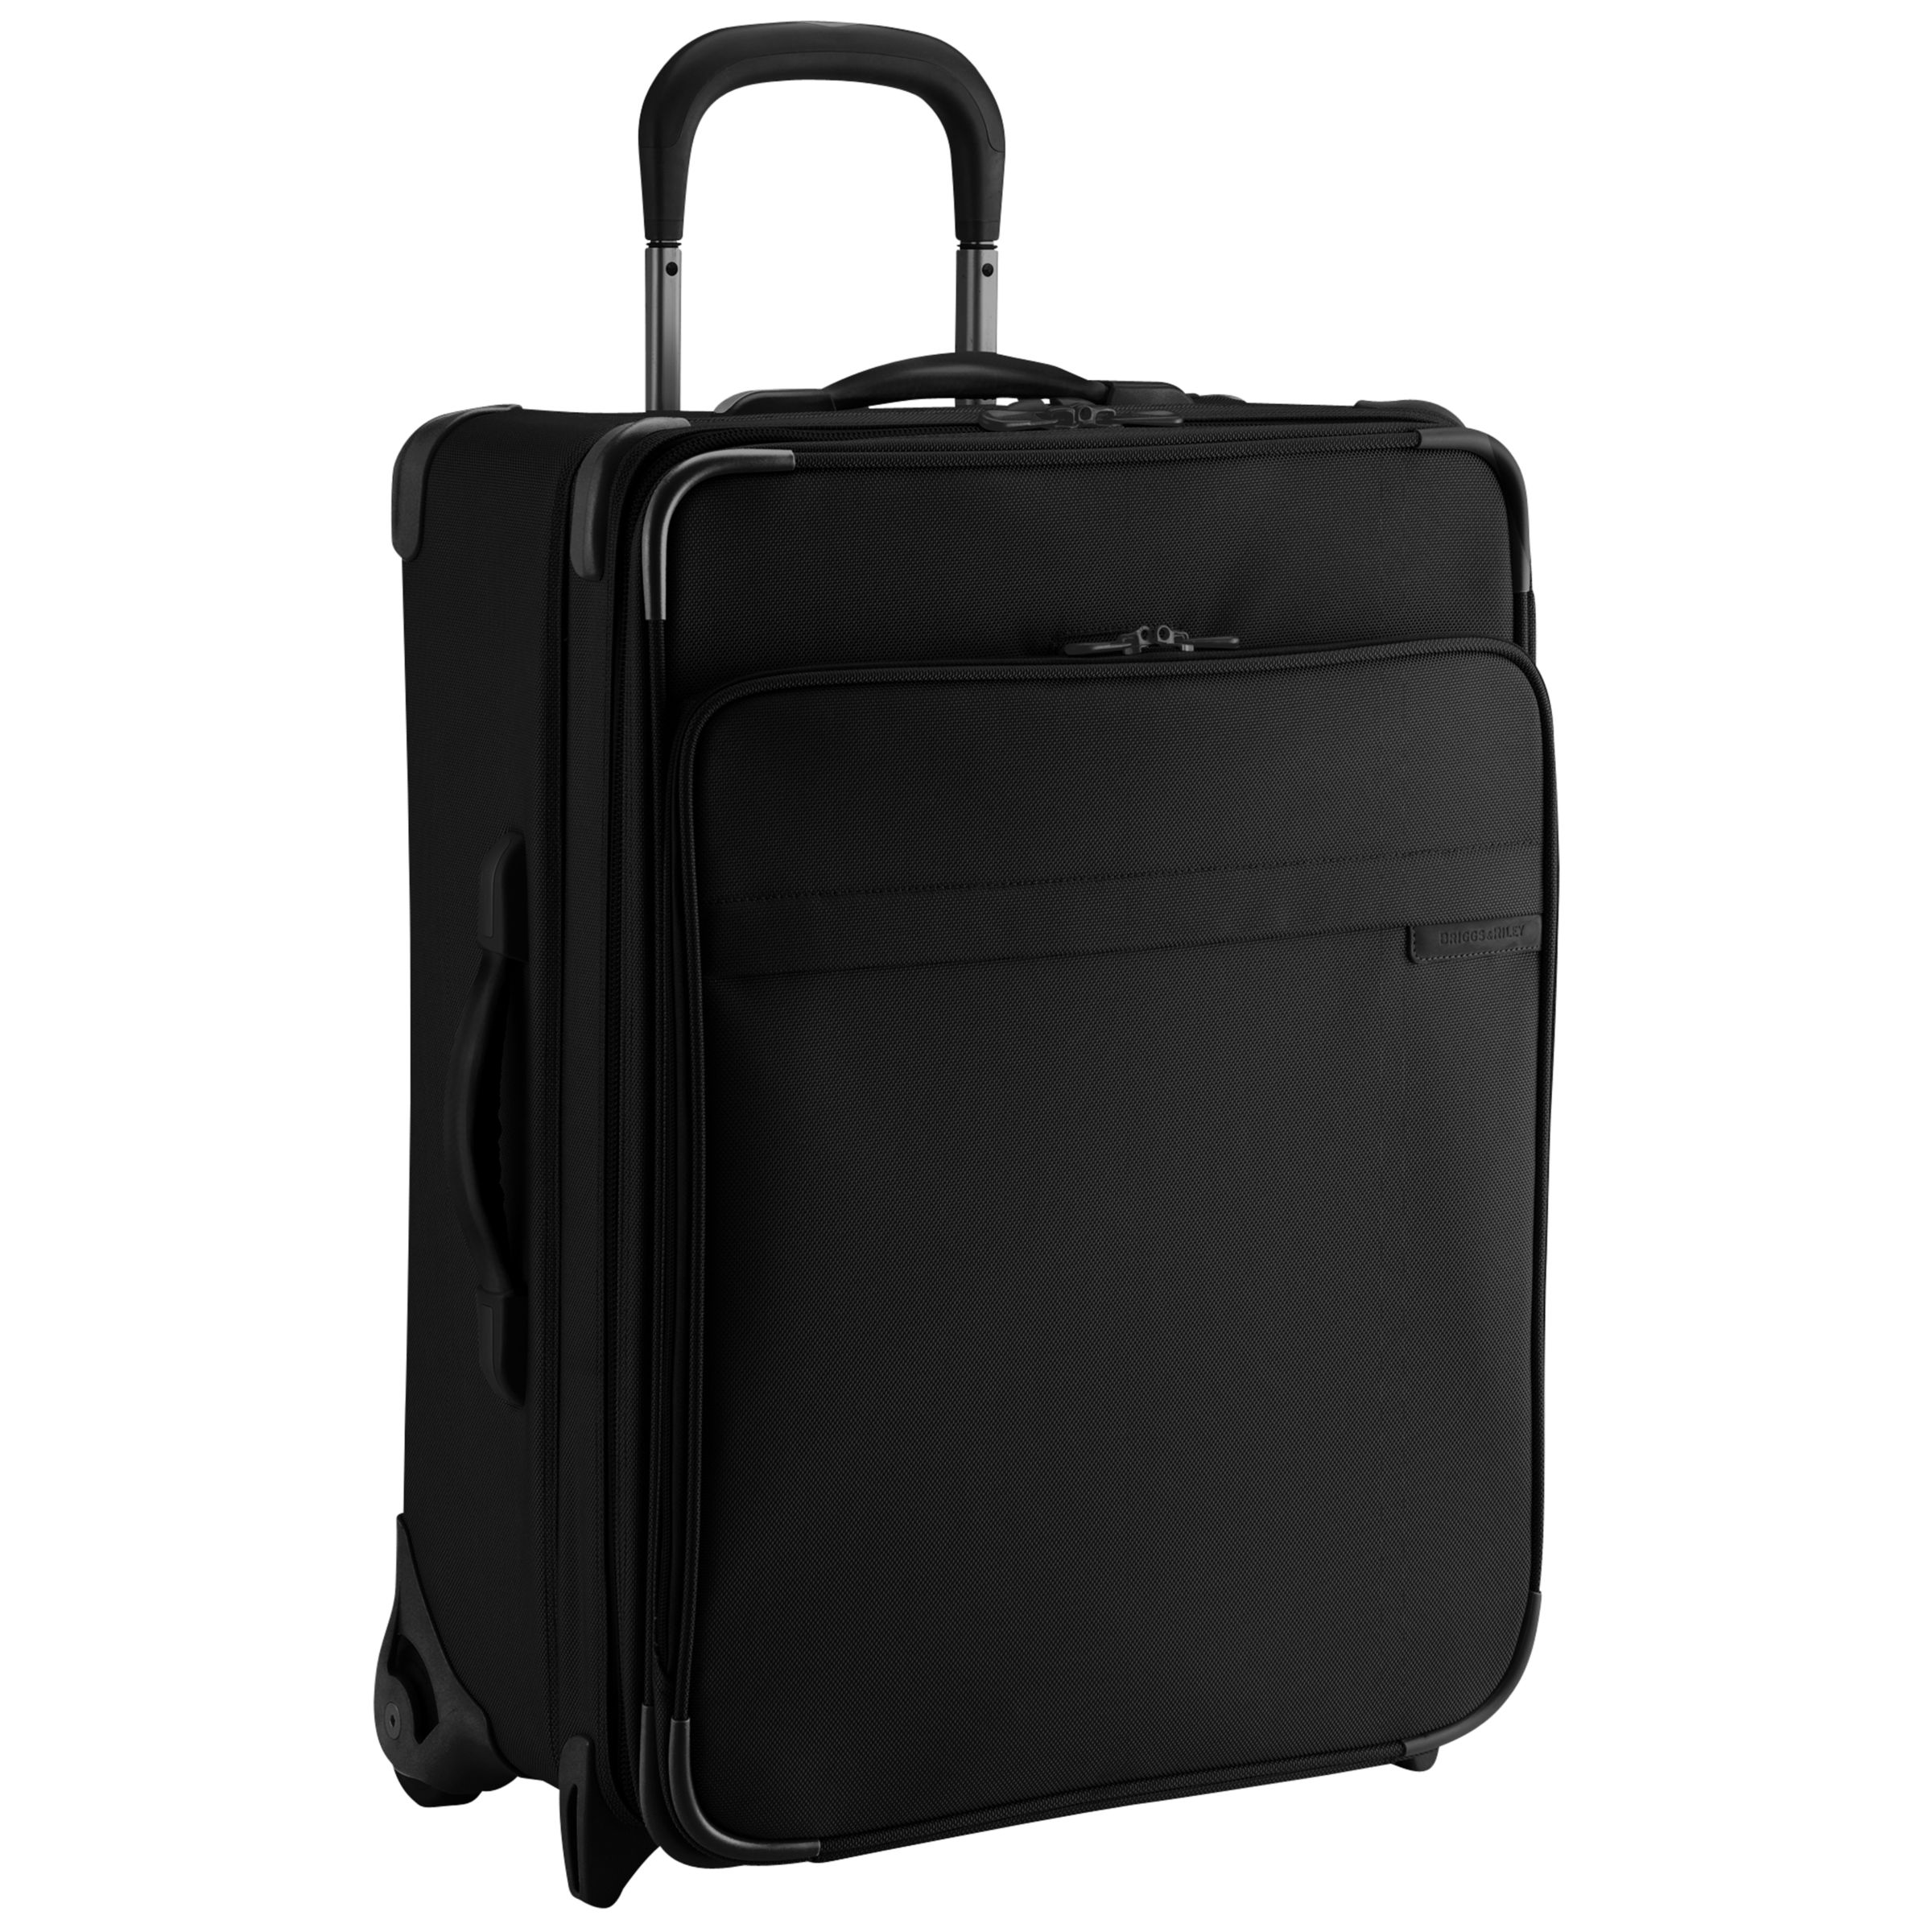 Briggs & Riley One-Touch Expandable Trolley Case, Black, Small at John Lewis